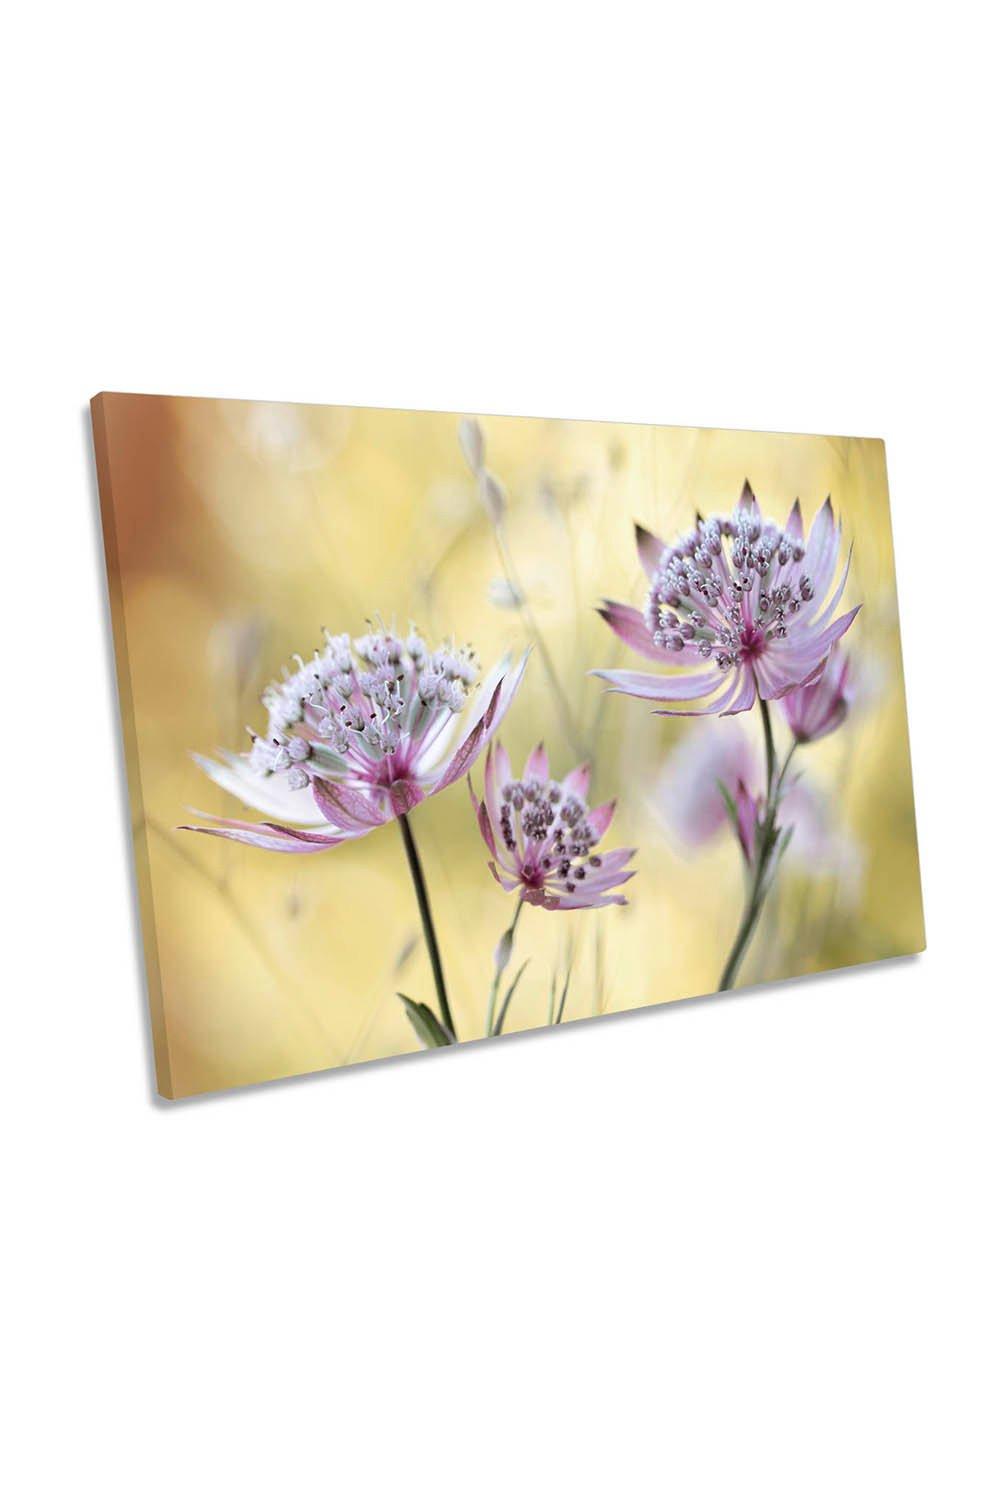 Astrantia Major Floral Flower Canvas Wall Art Picture Print